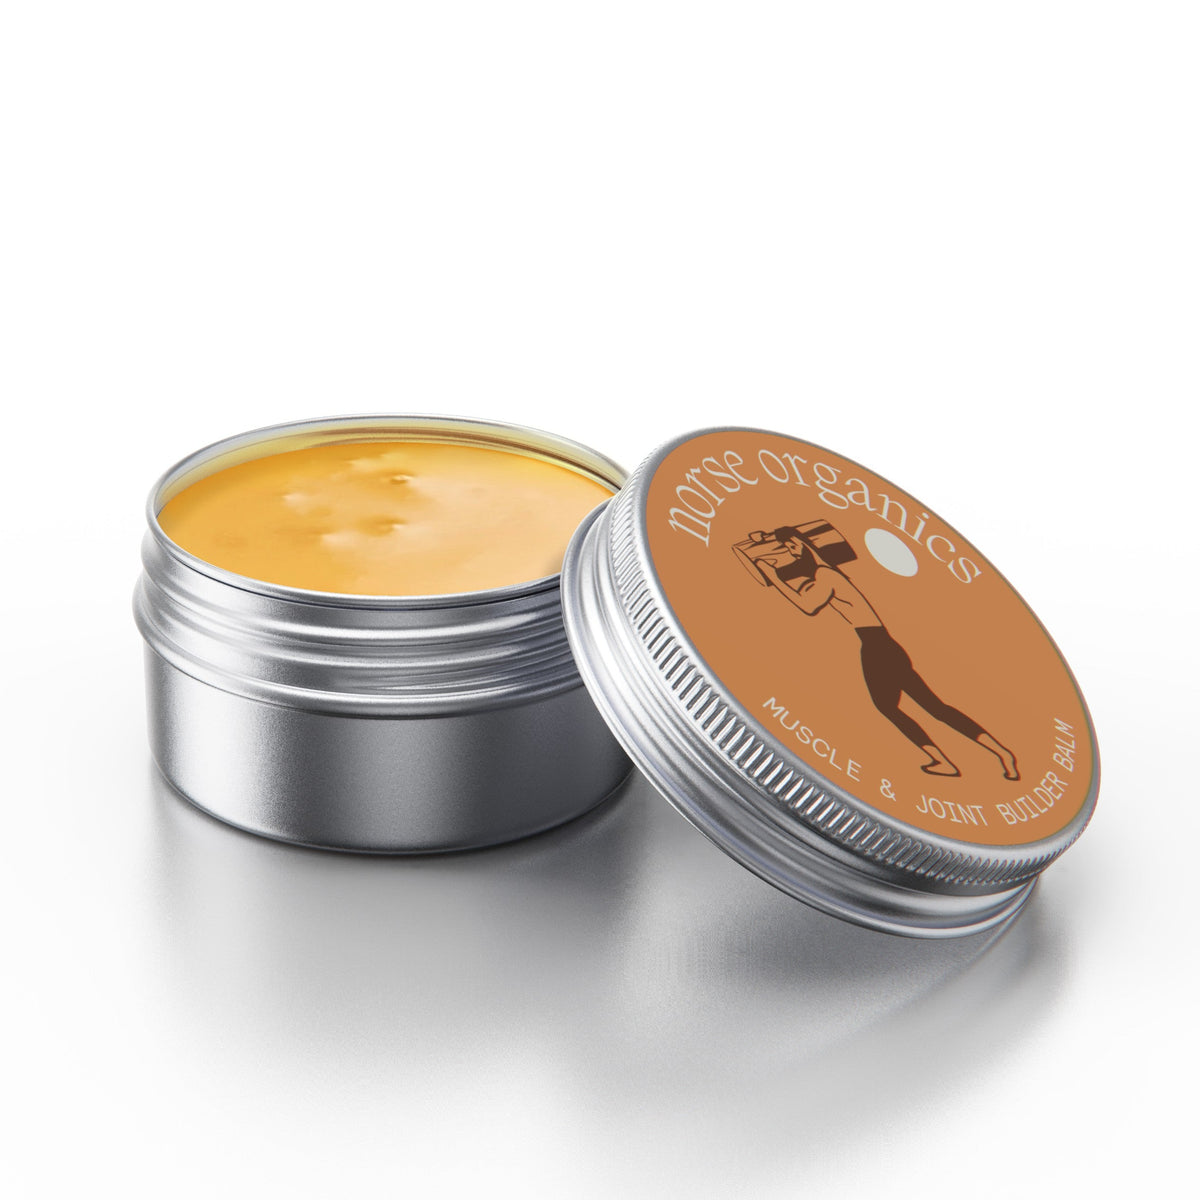 Muscle & Joint Builder Balm